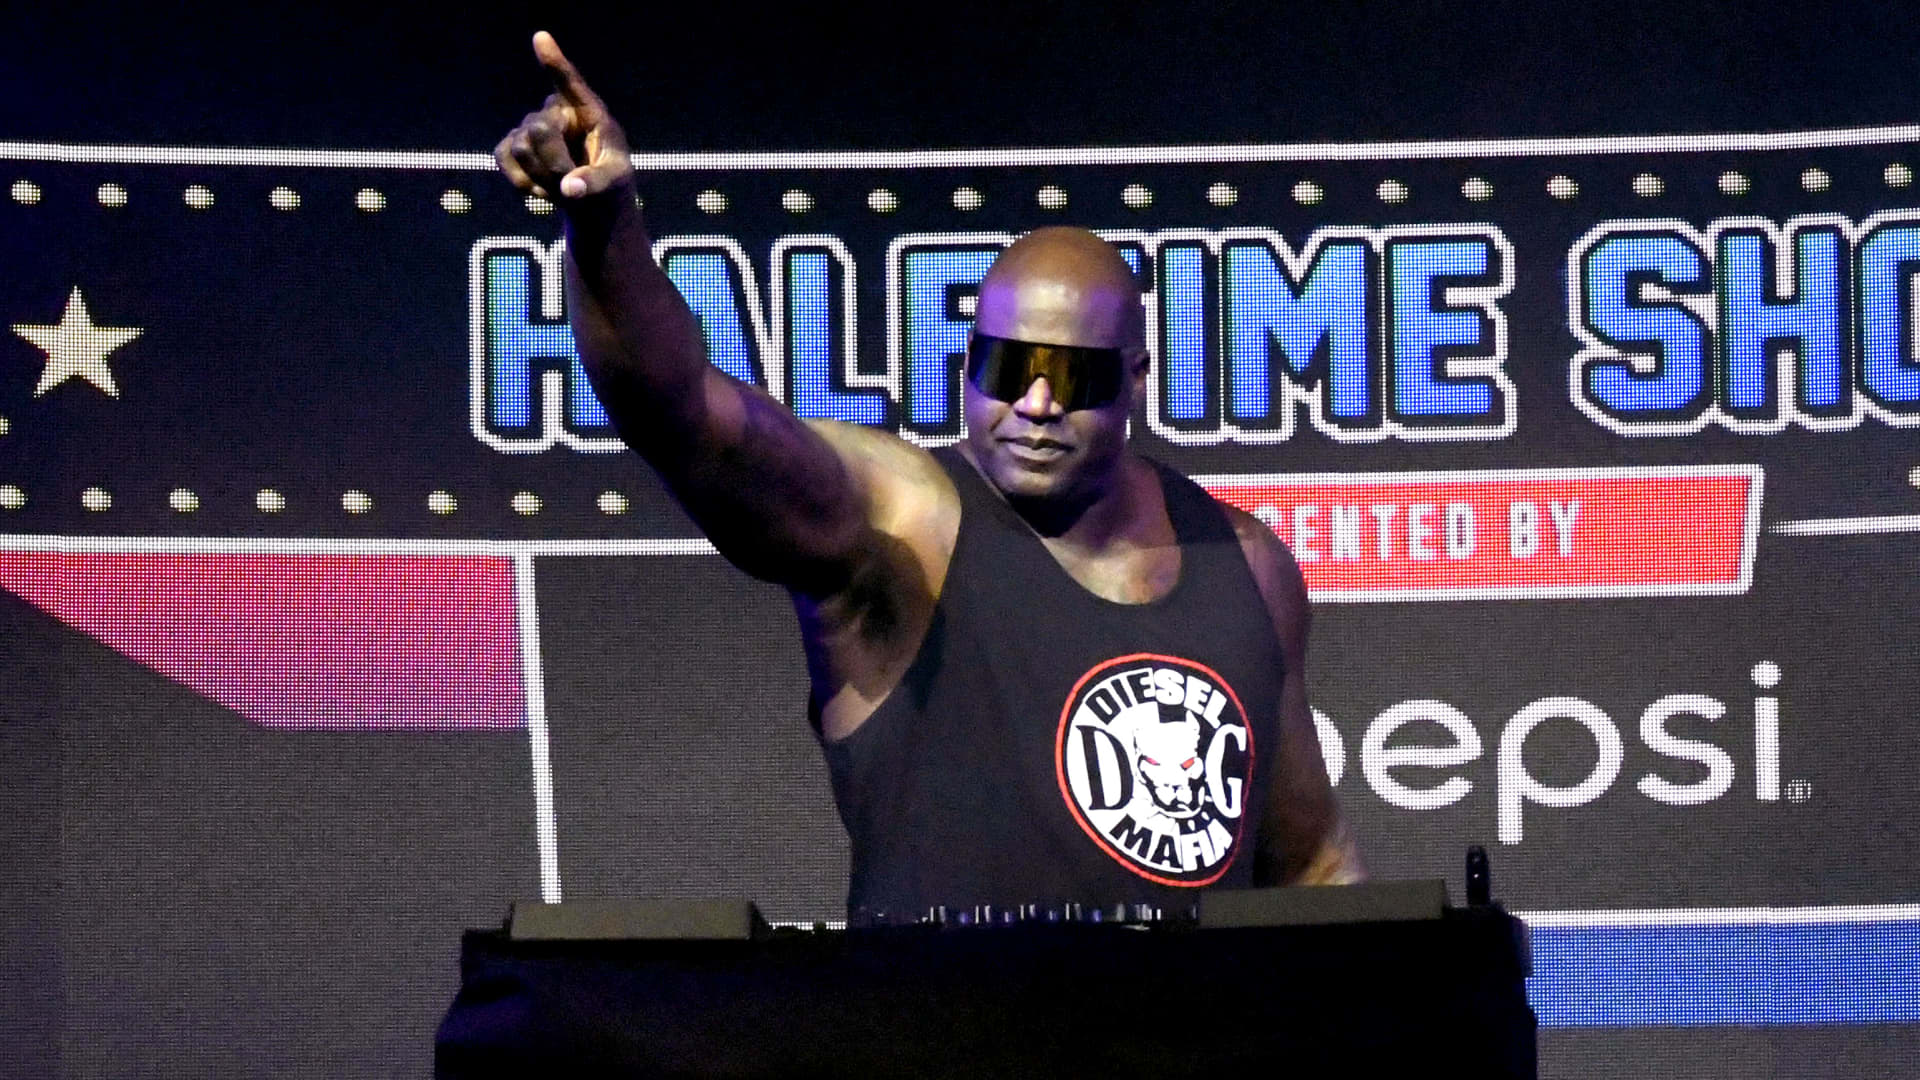 Shaquille O’Neal performs as DJ Diesel at The SHAQ Bowl for Super Bowl LV on February 07, 2021 in Tampa, Florida.